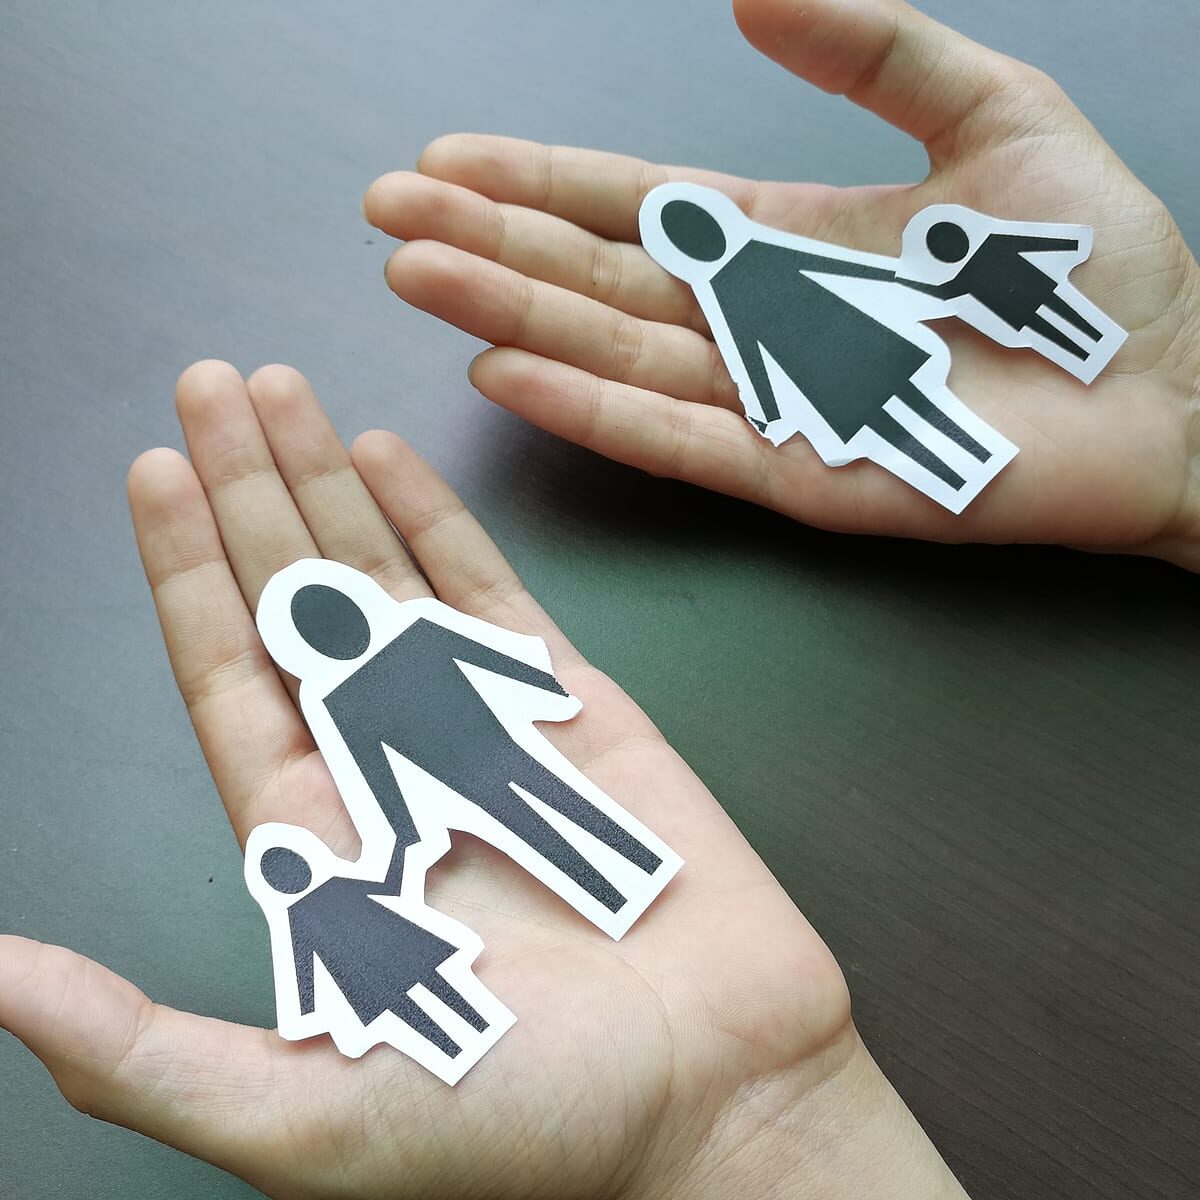 Cutouts of a woman and a child